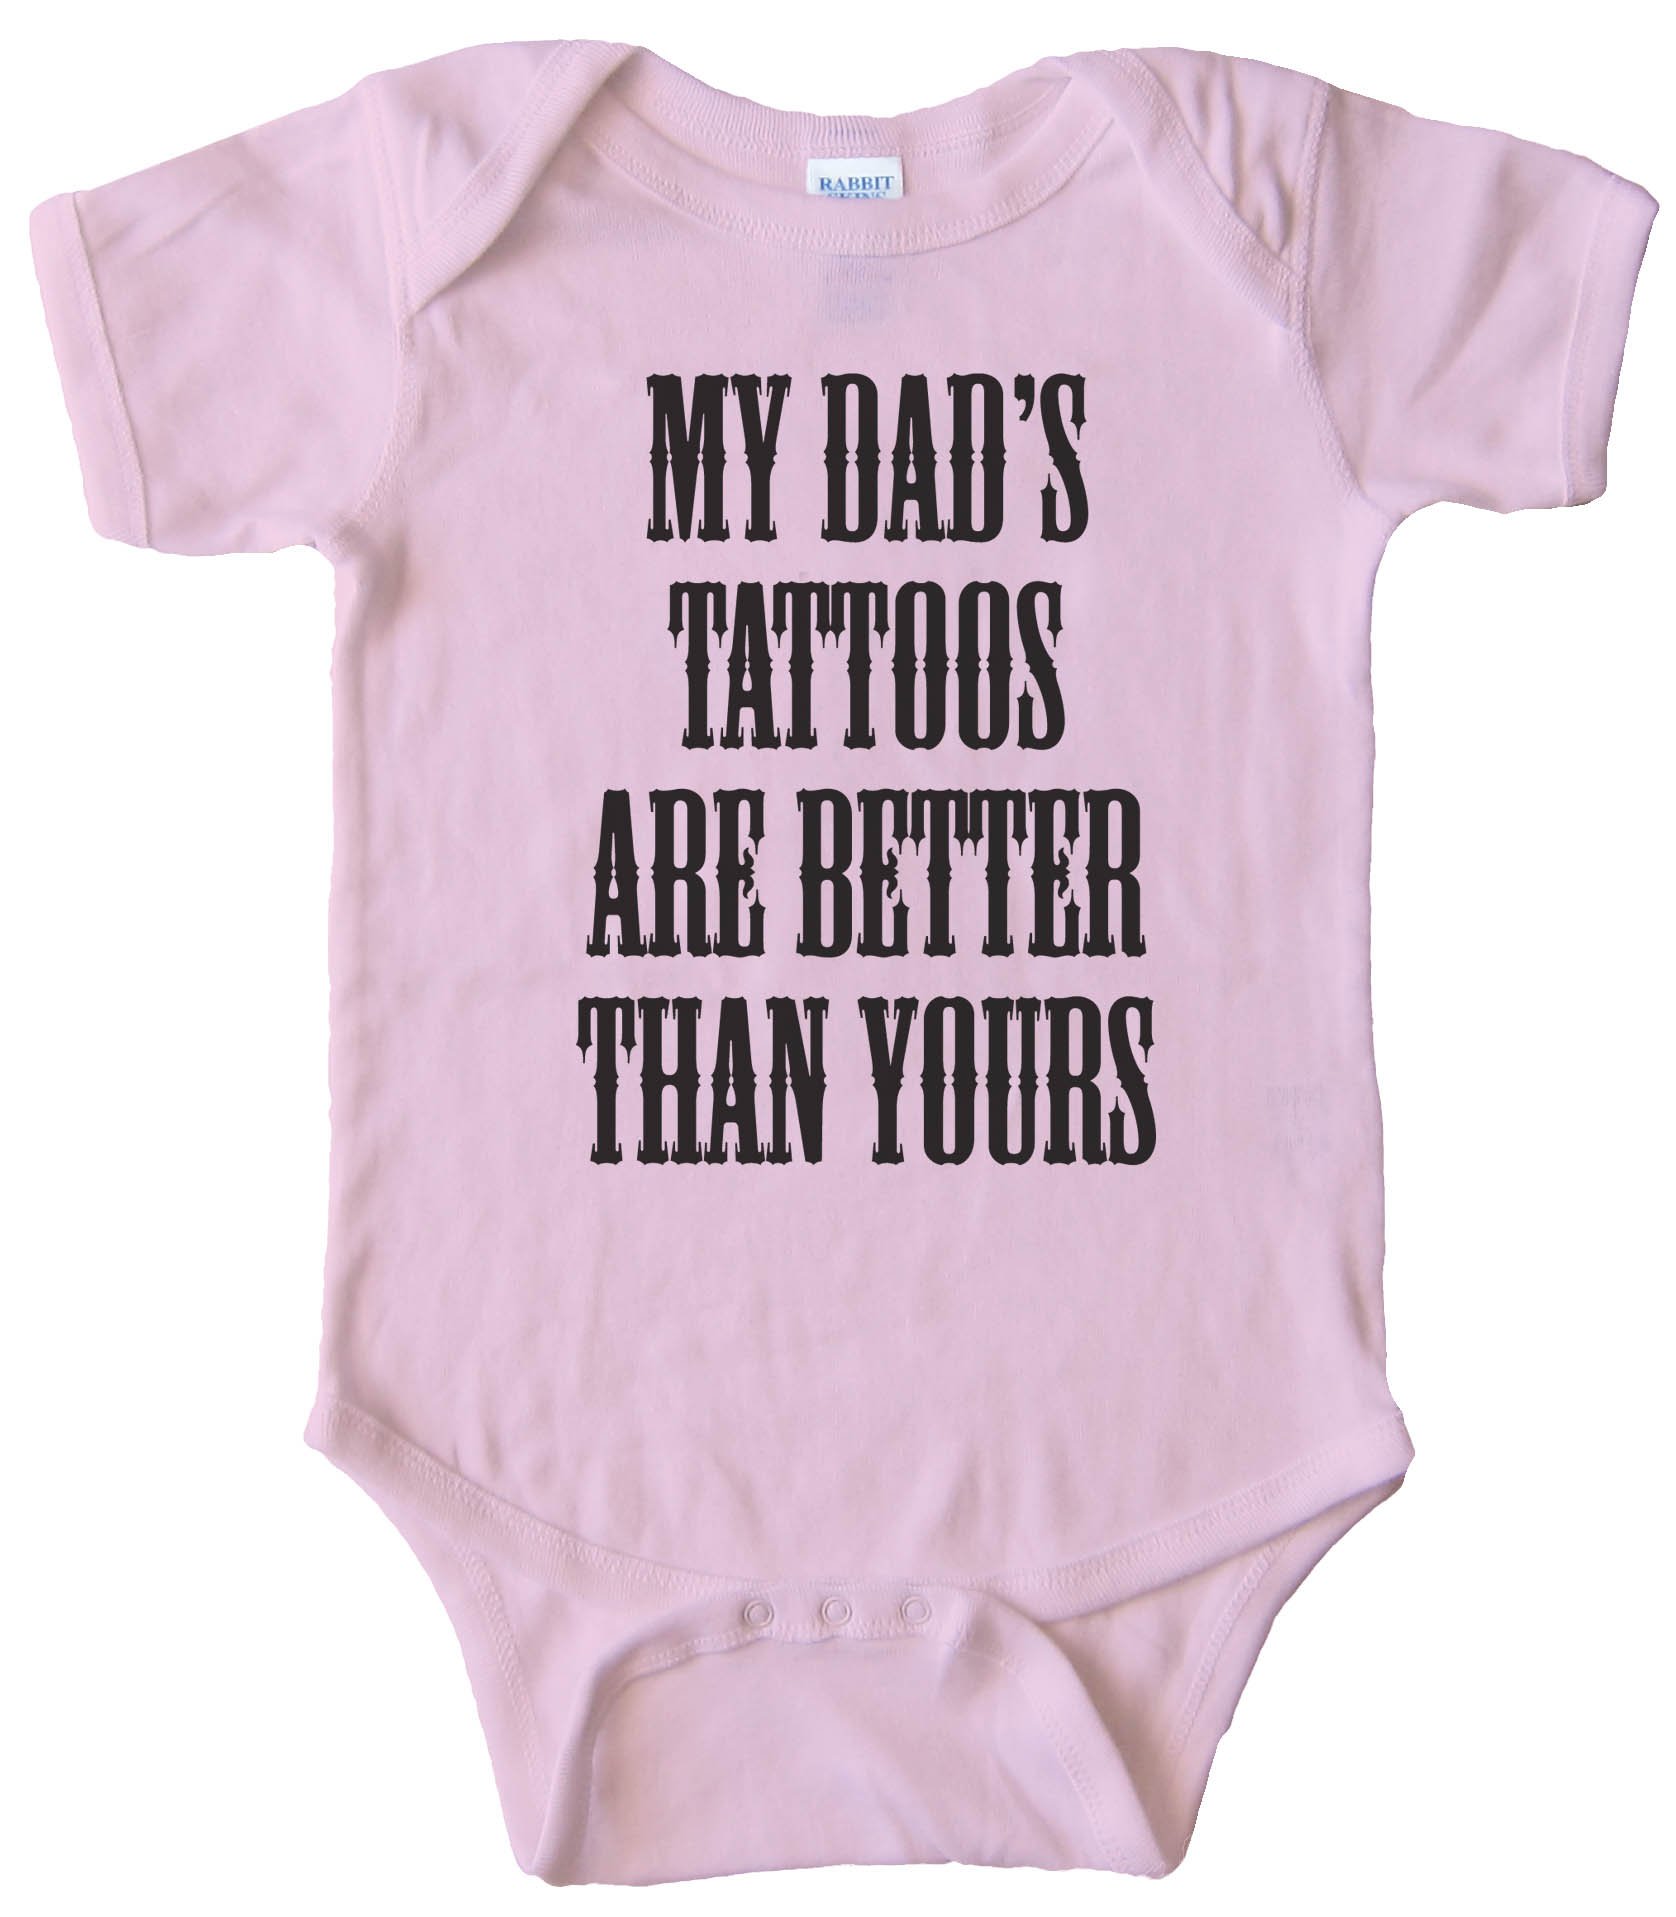 My Dads Tattoos Are Better Than Yours - Baby Bodysuit